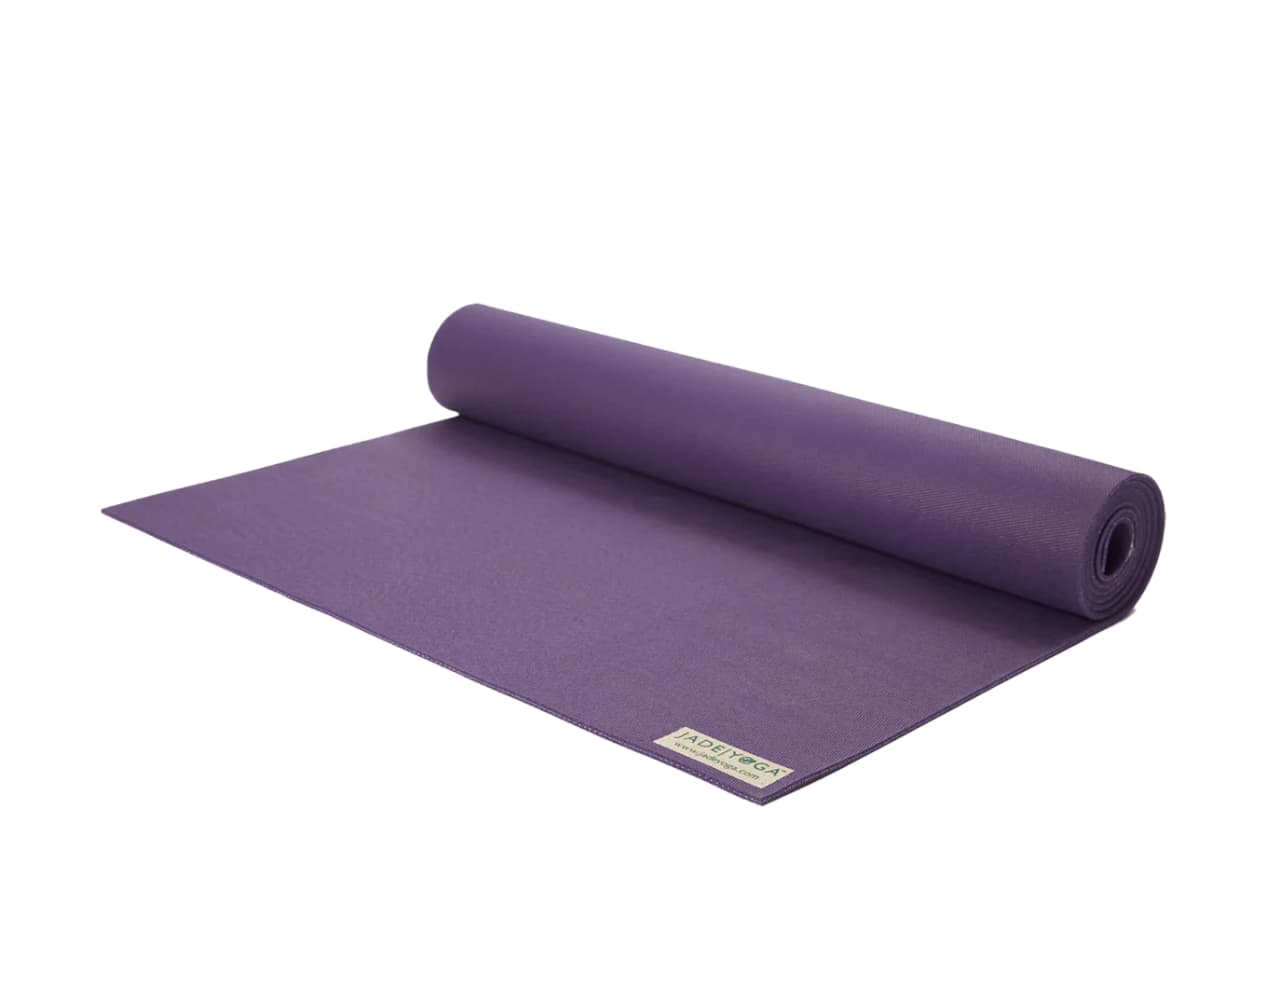 Walk On A Yoga Mat All The Time [HAWAII INSIDER TIP OF THE WEEK